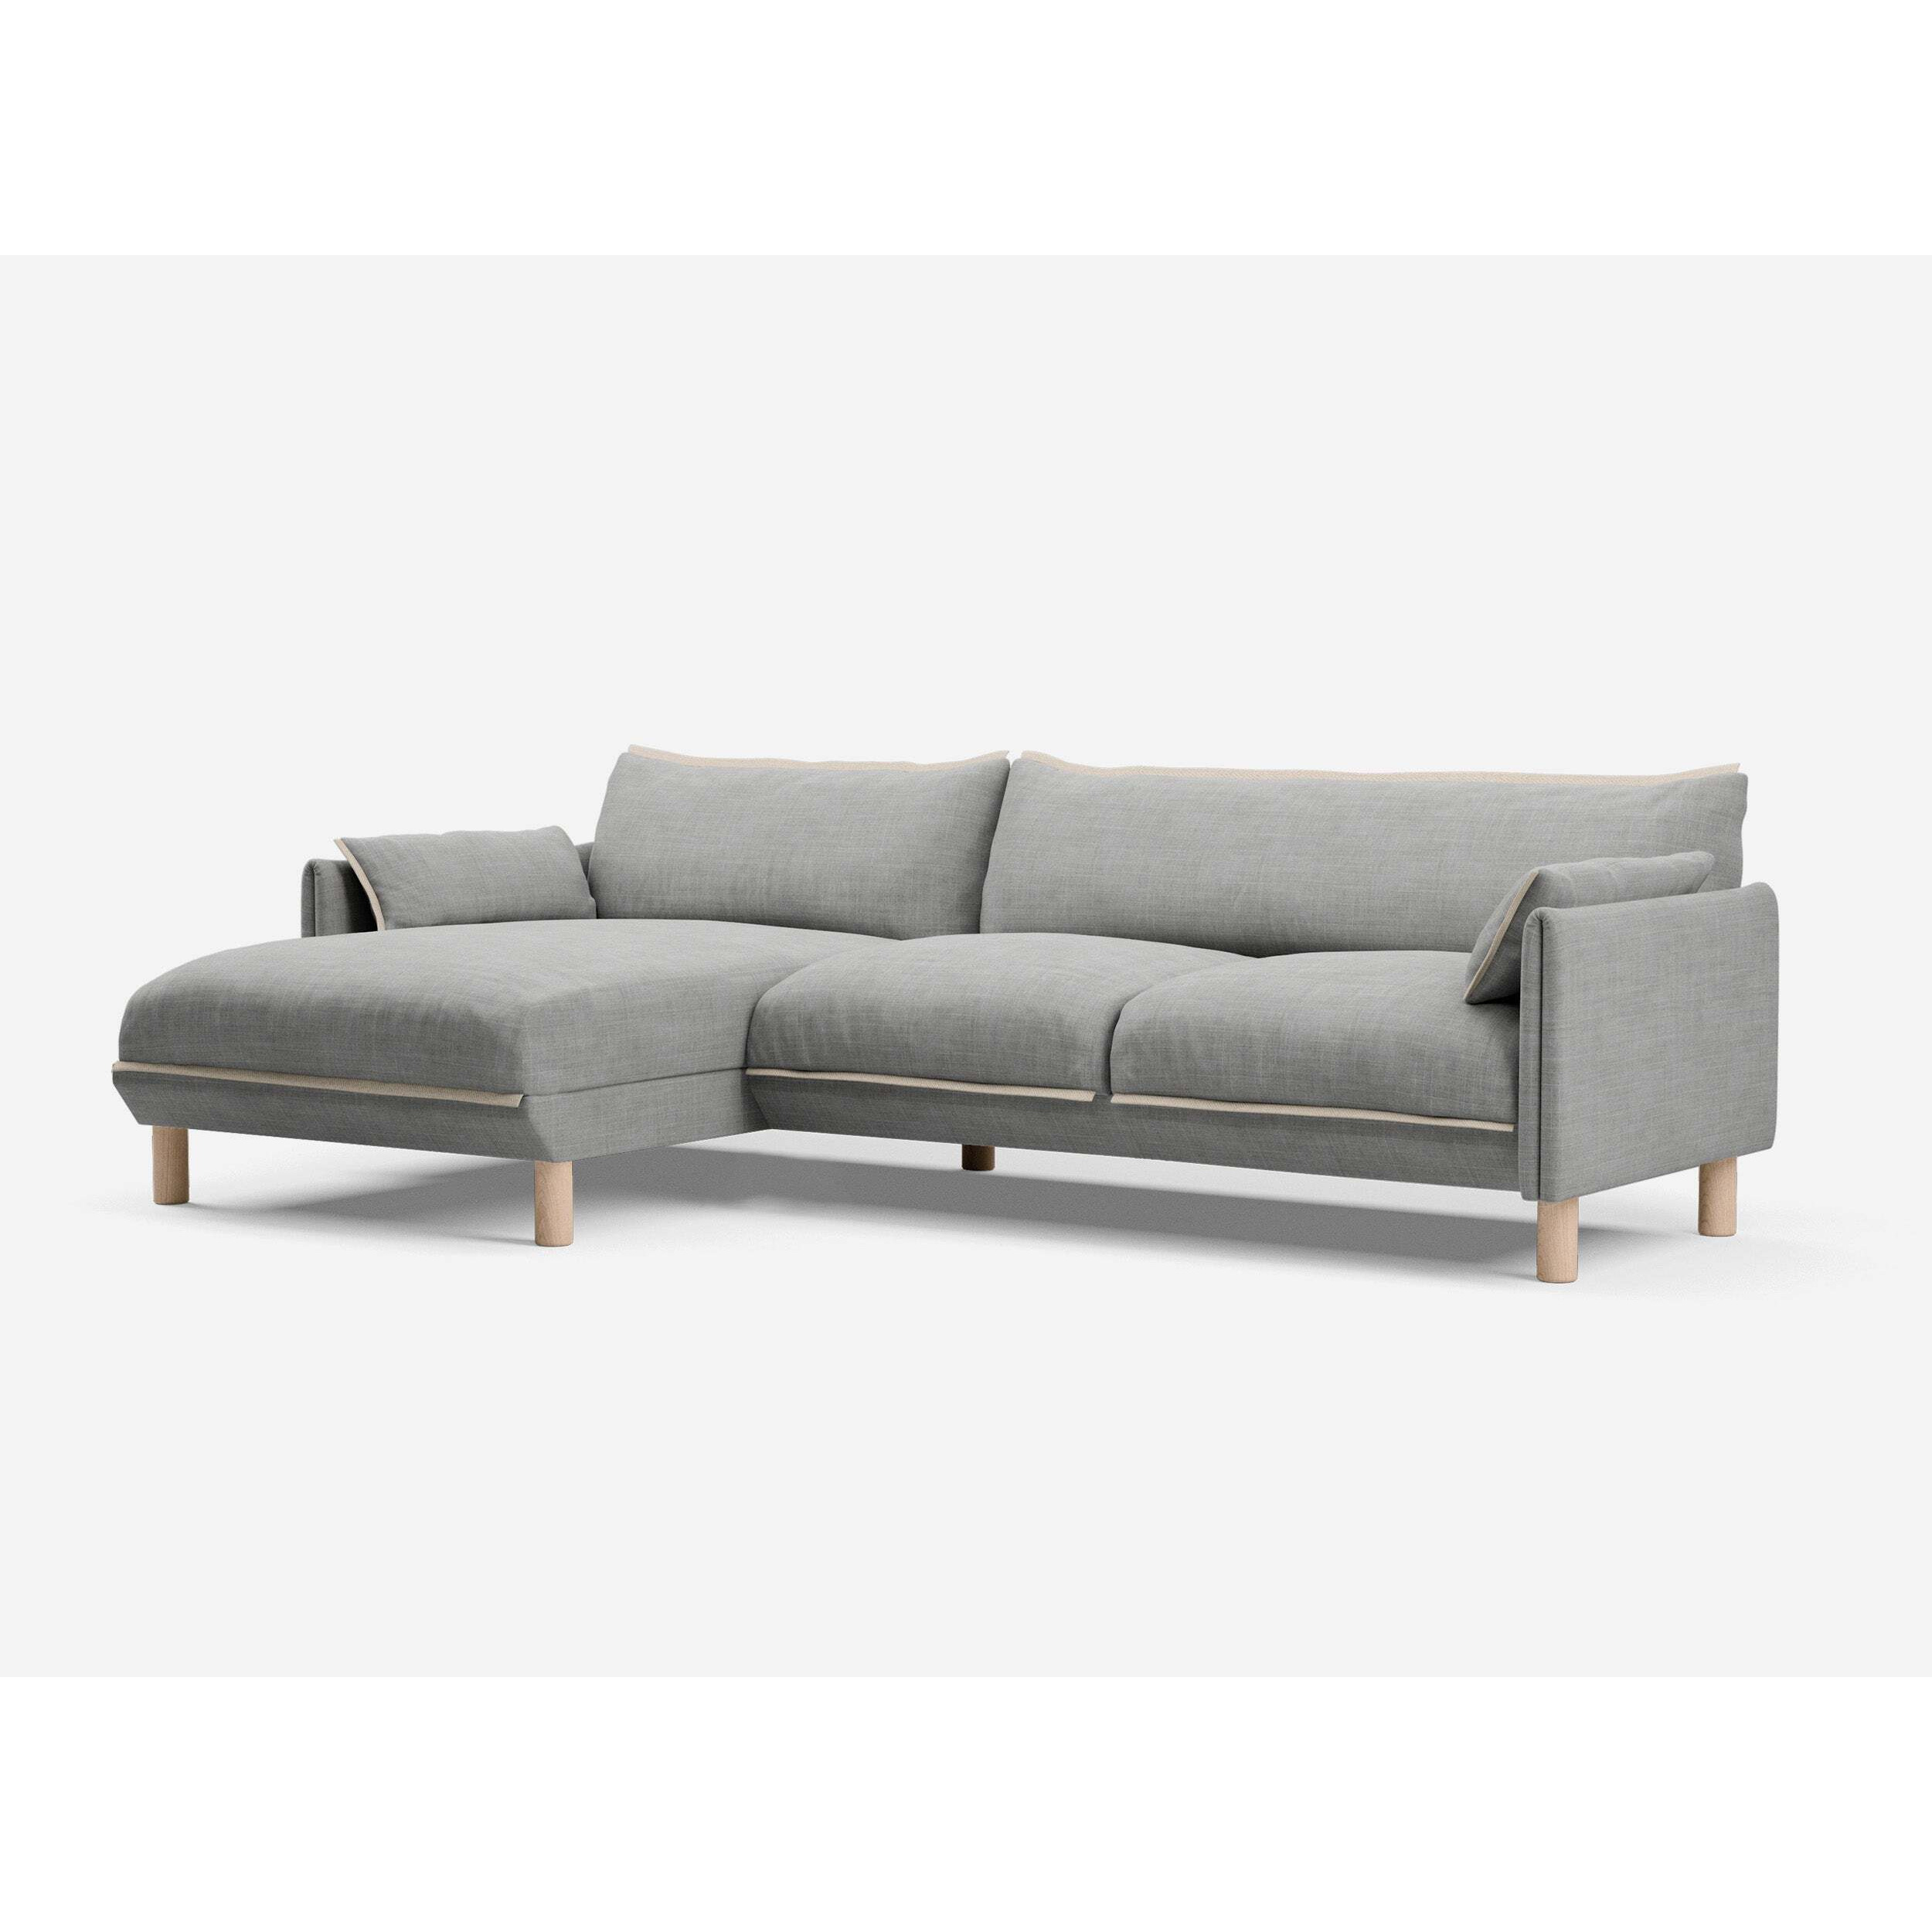 4 Seater LH Chaise Sofa - Light Grey Weave - image 1